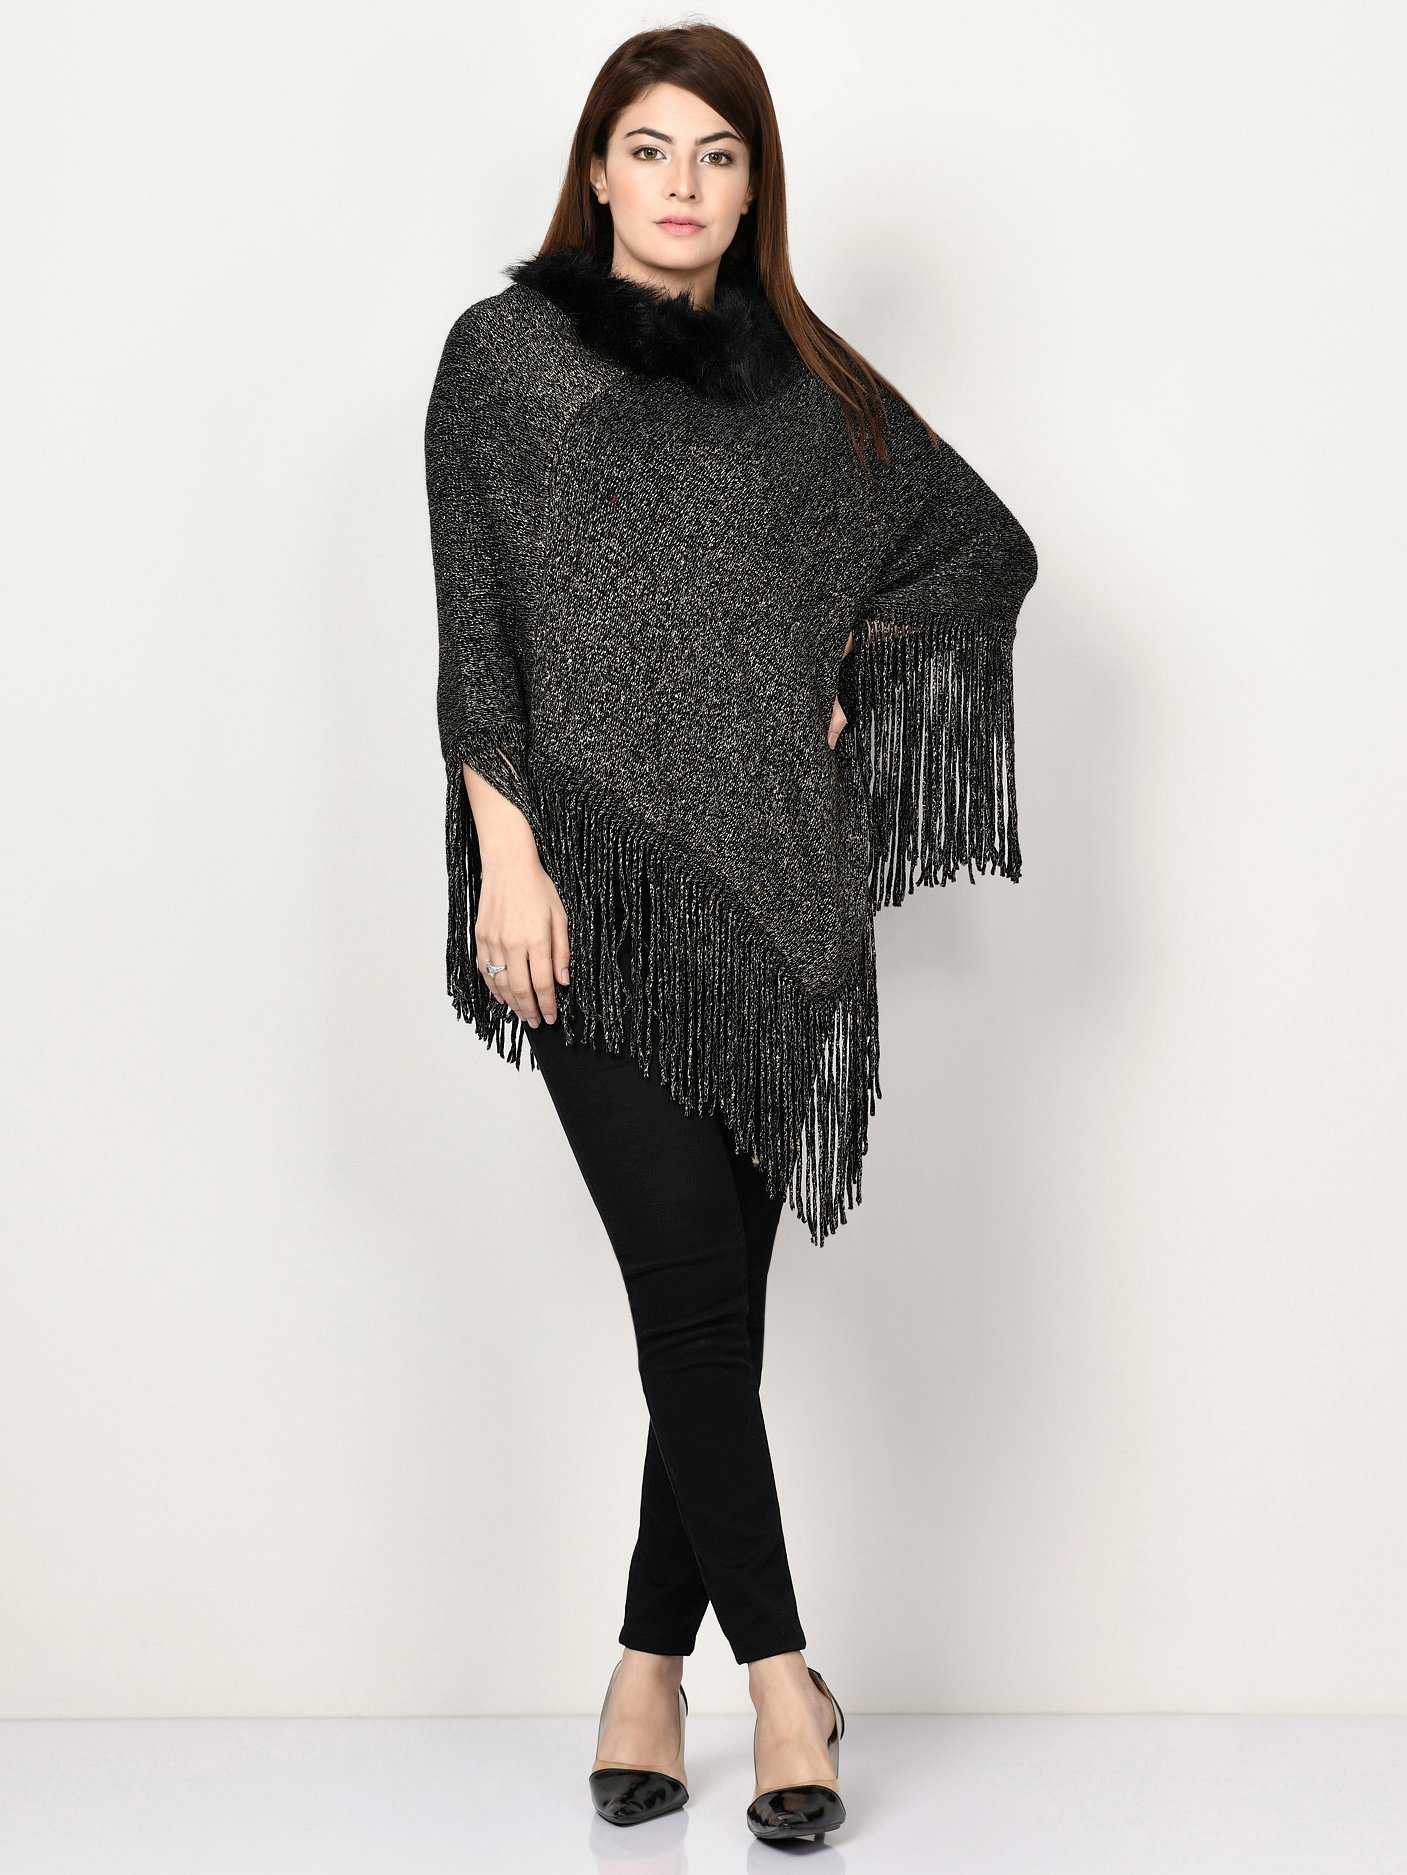 Limelight Shimmery Fur Poncho CPS71-FRE-BLK 2019 | Limelight Sale 2020